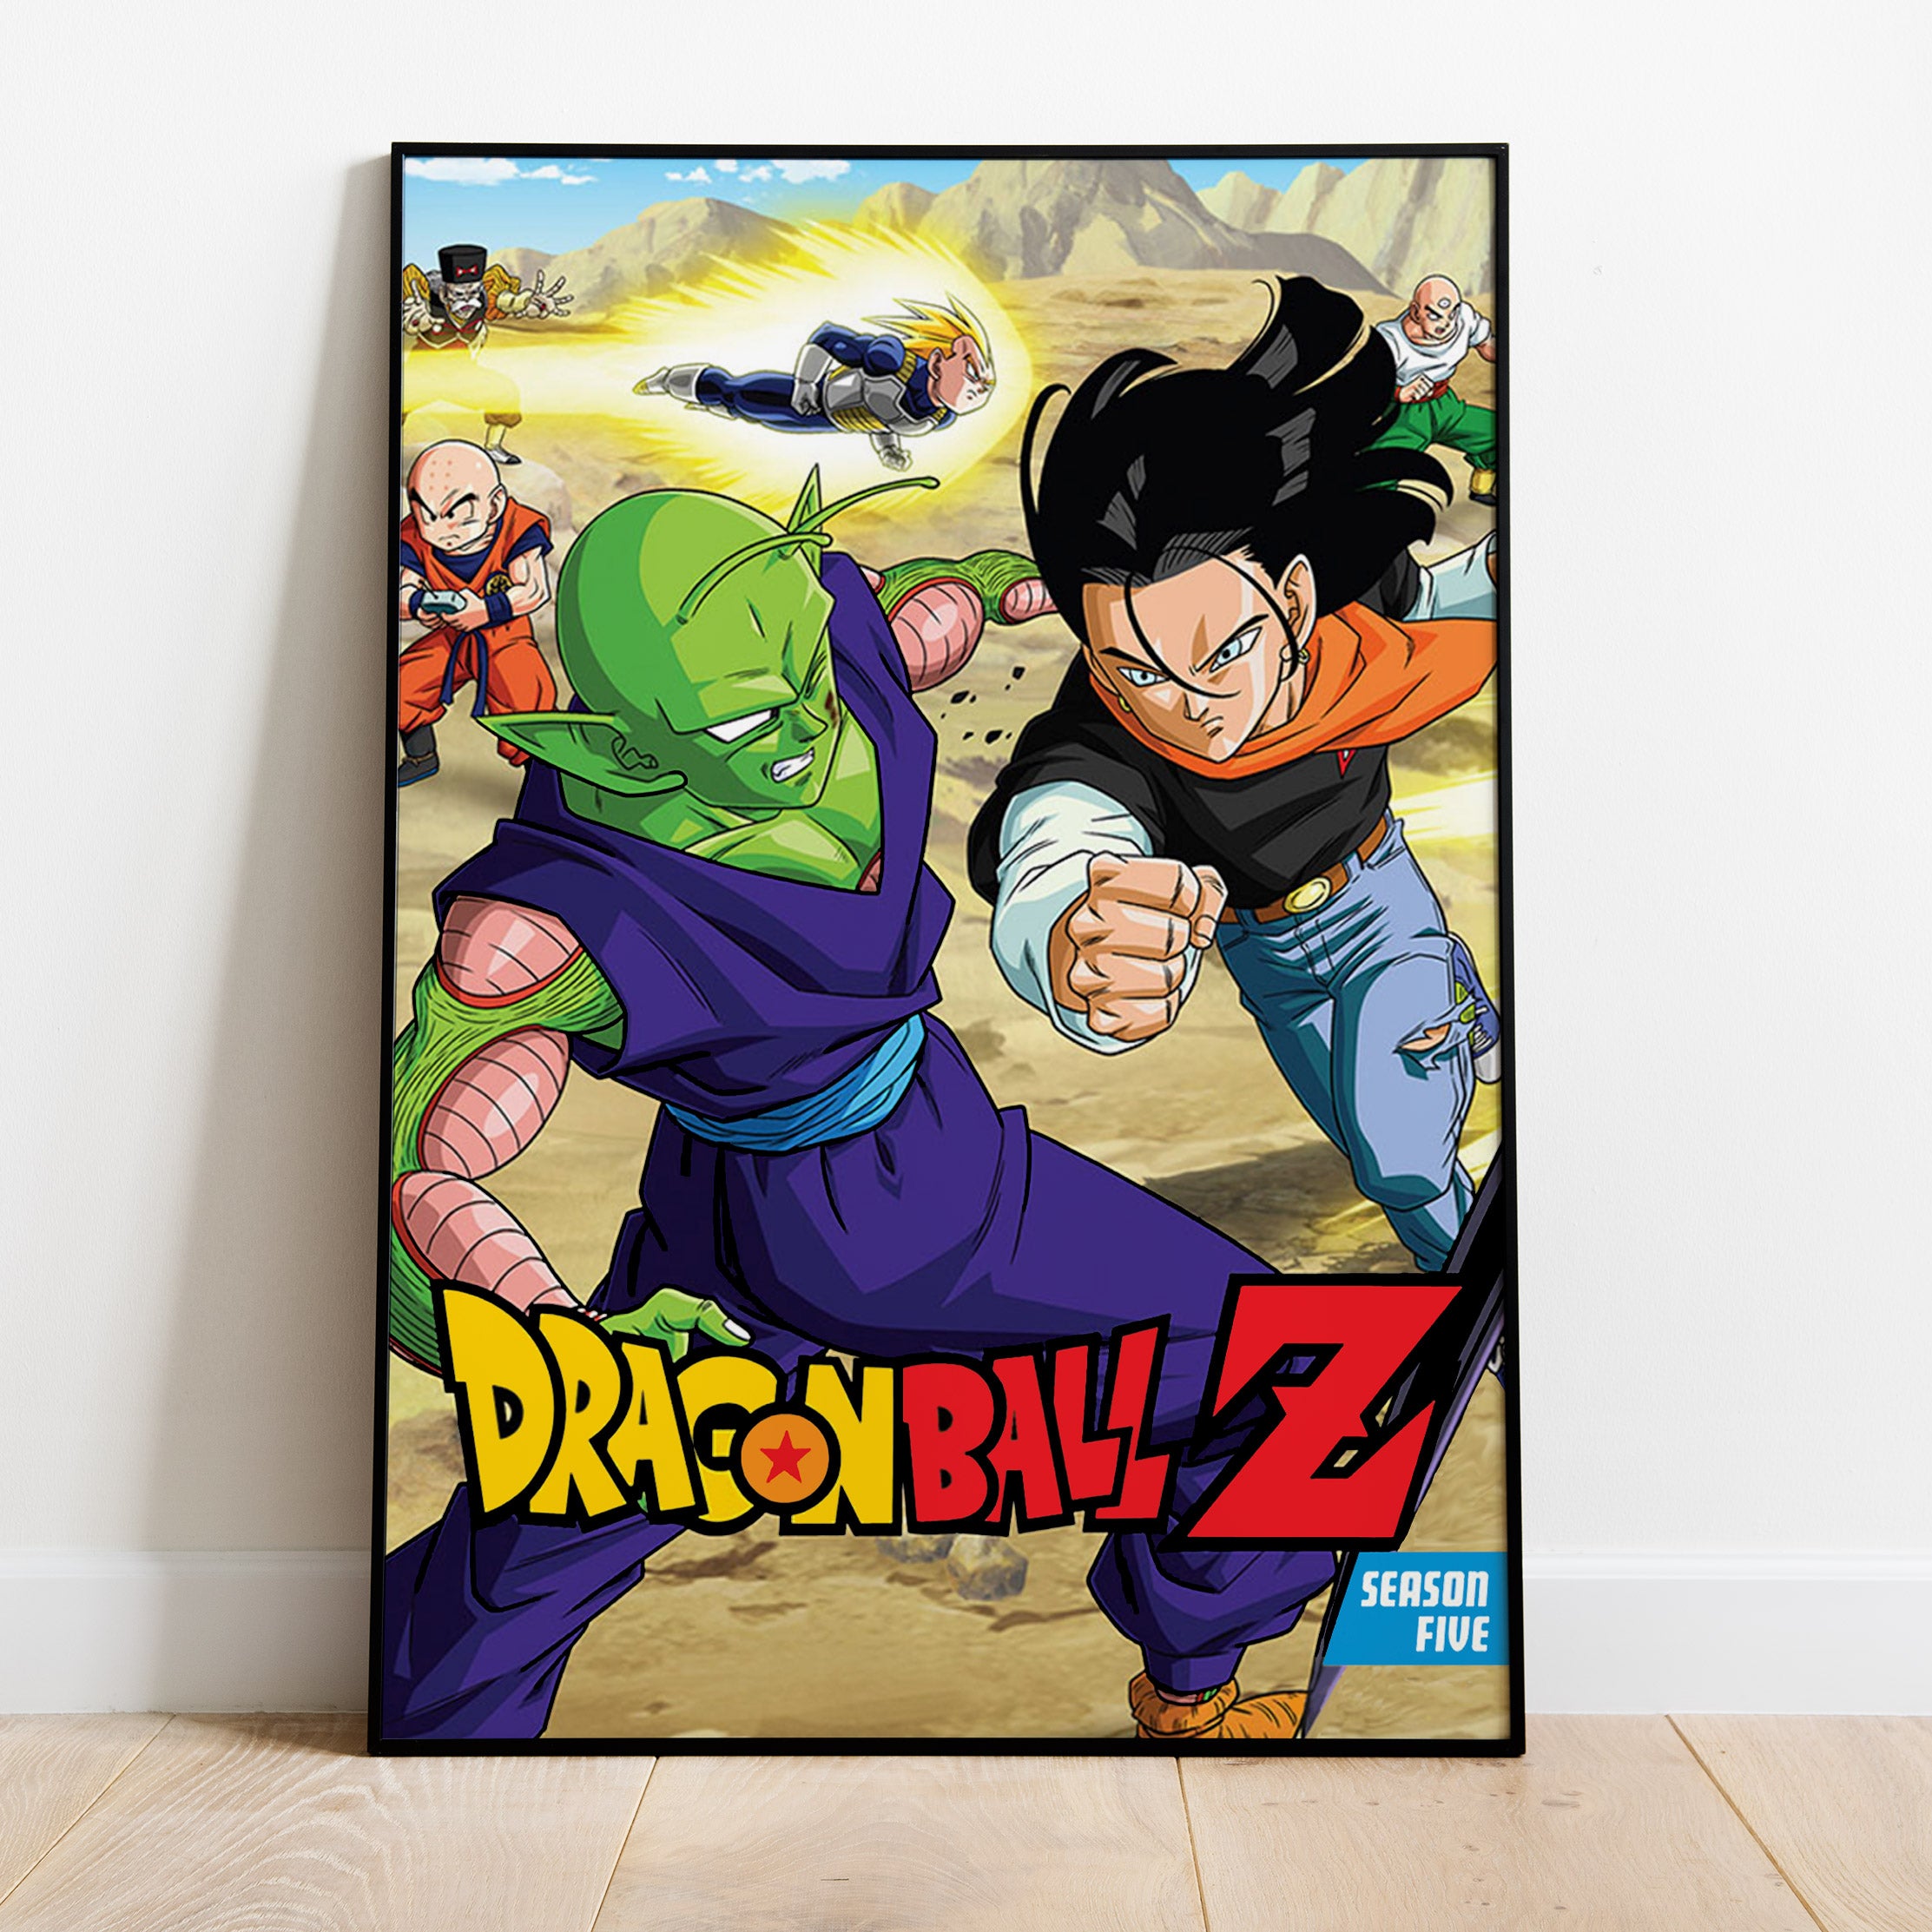 Season-5 Imperfect Cell and Perfect Cell Sagas | Dragon Ball Z Poster